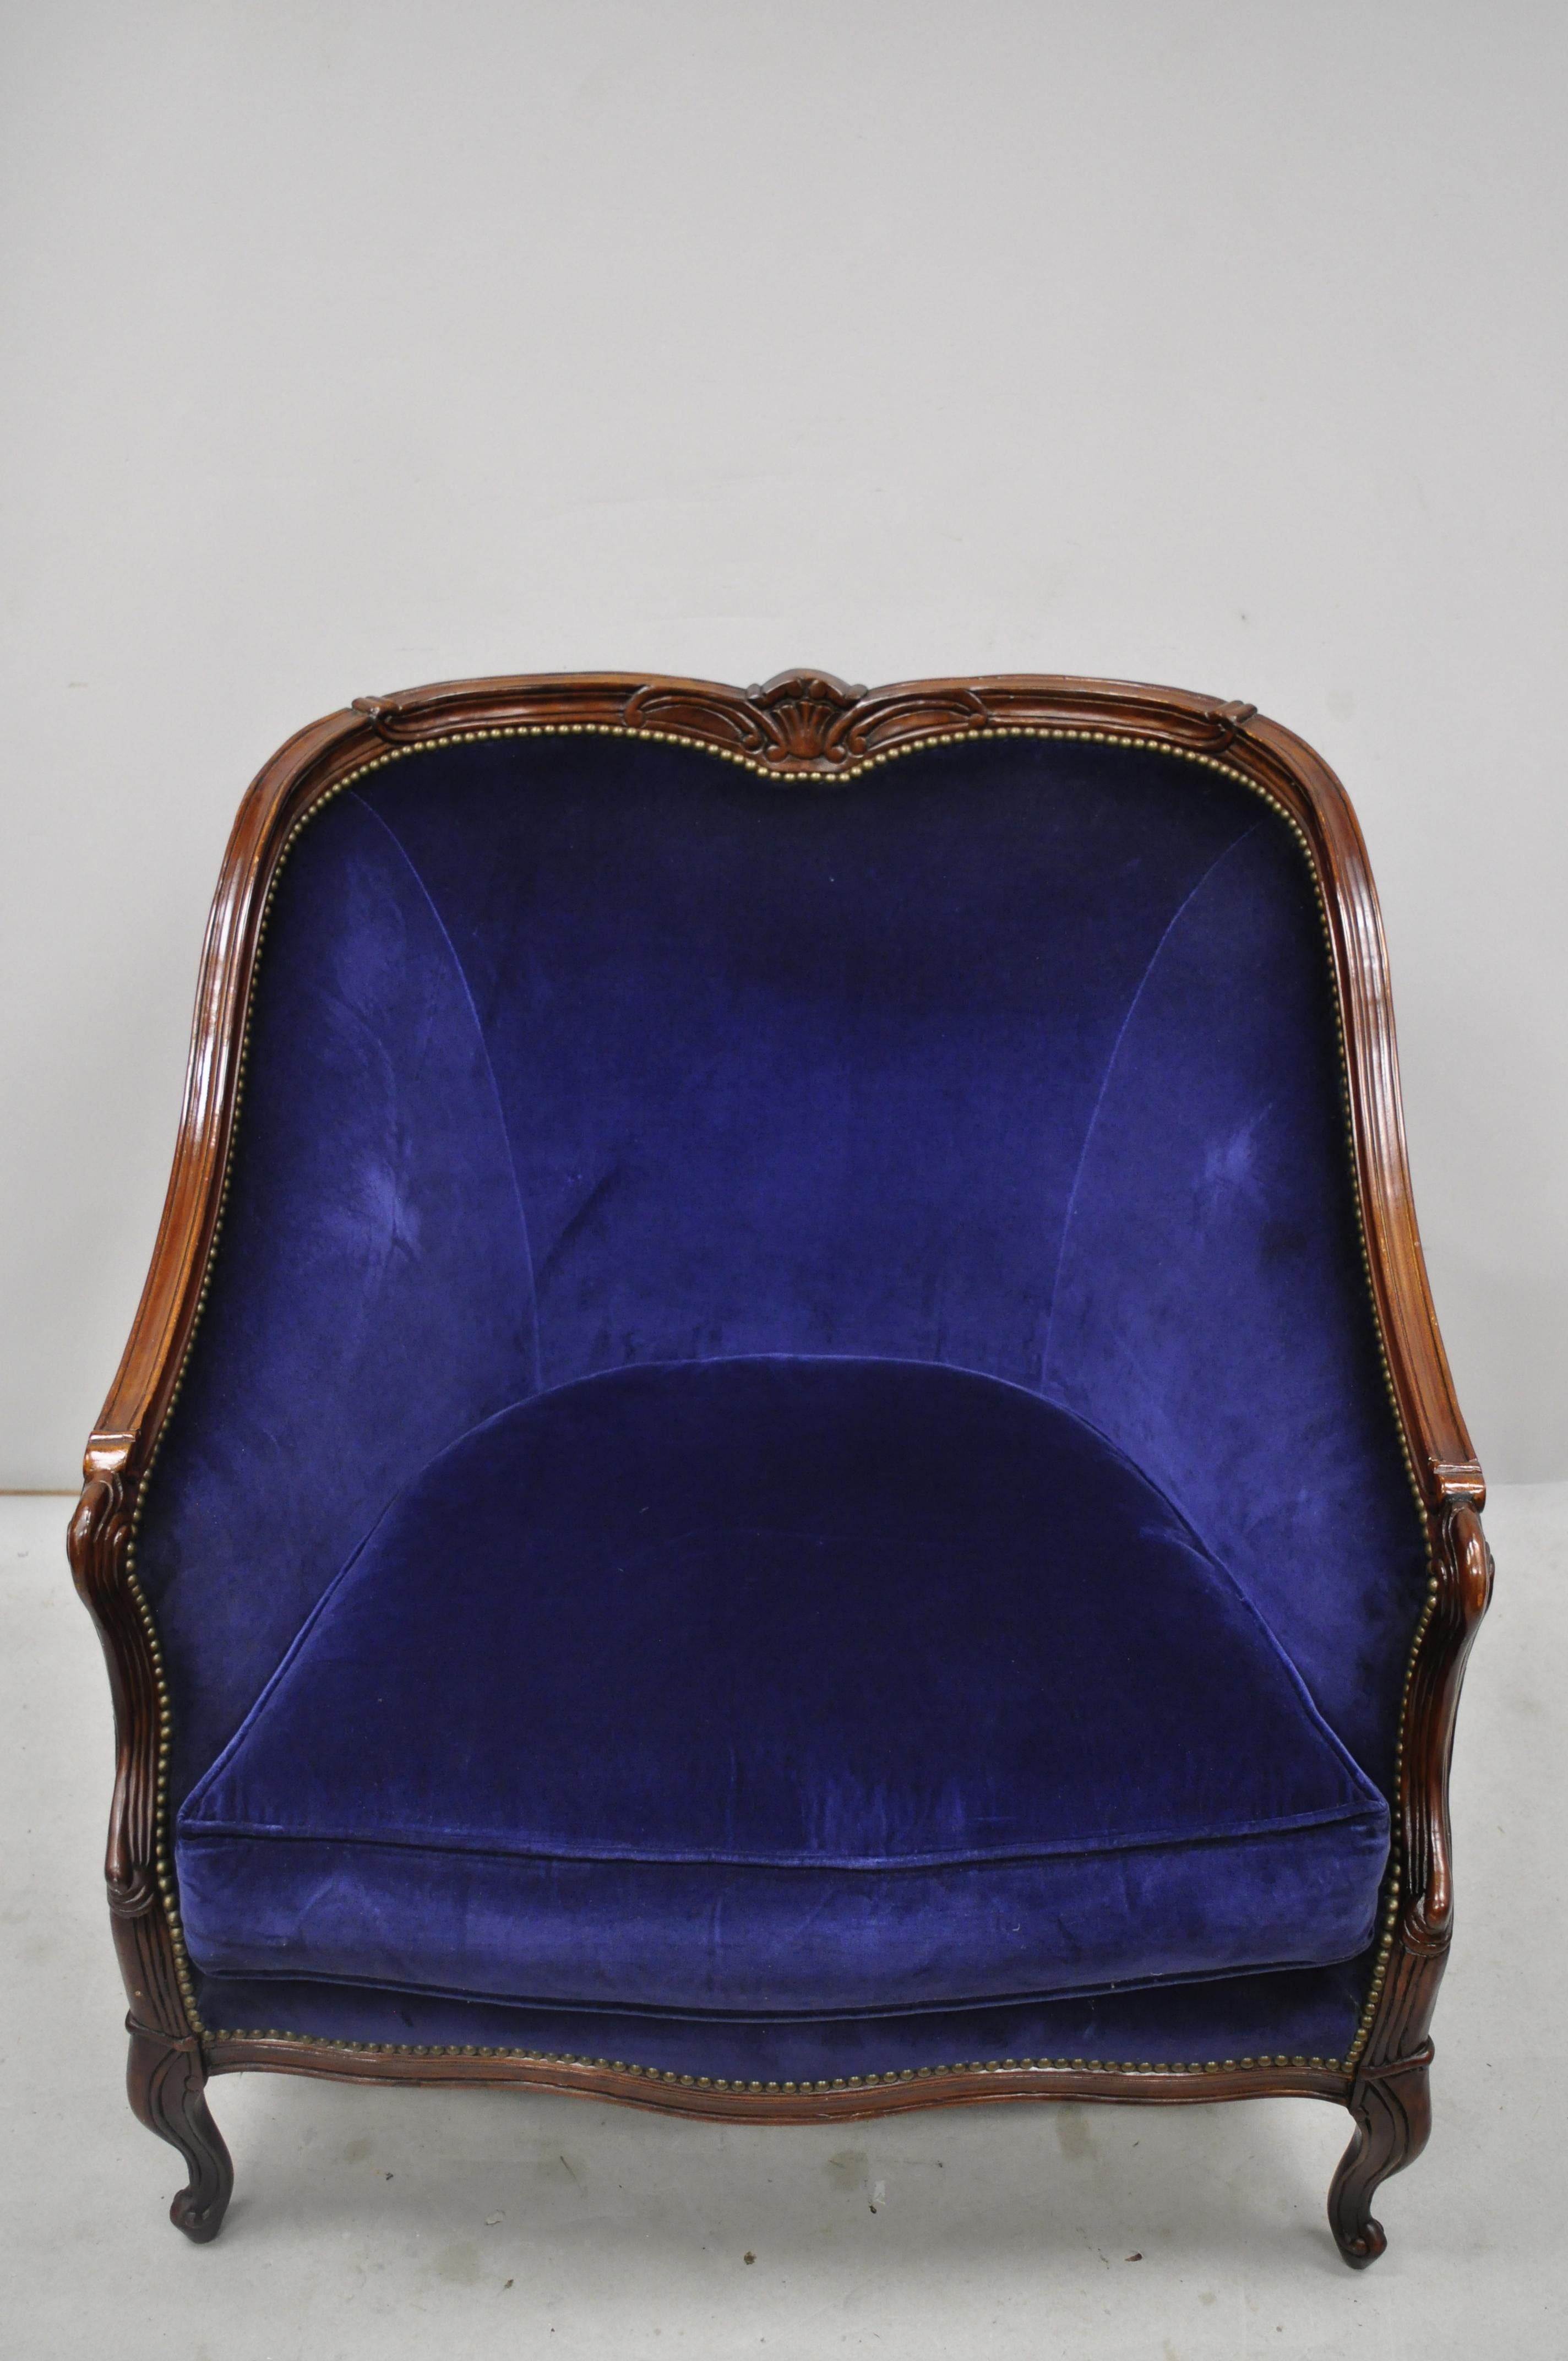 Large oversized Beacon Hill Henredon blue French Louis XV style lounge armchair. Listing includes a large impressive size, solid wood frame, nicely carved details, original labels, cabriole legs, quality American craftsmanship, great style and form,